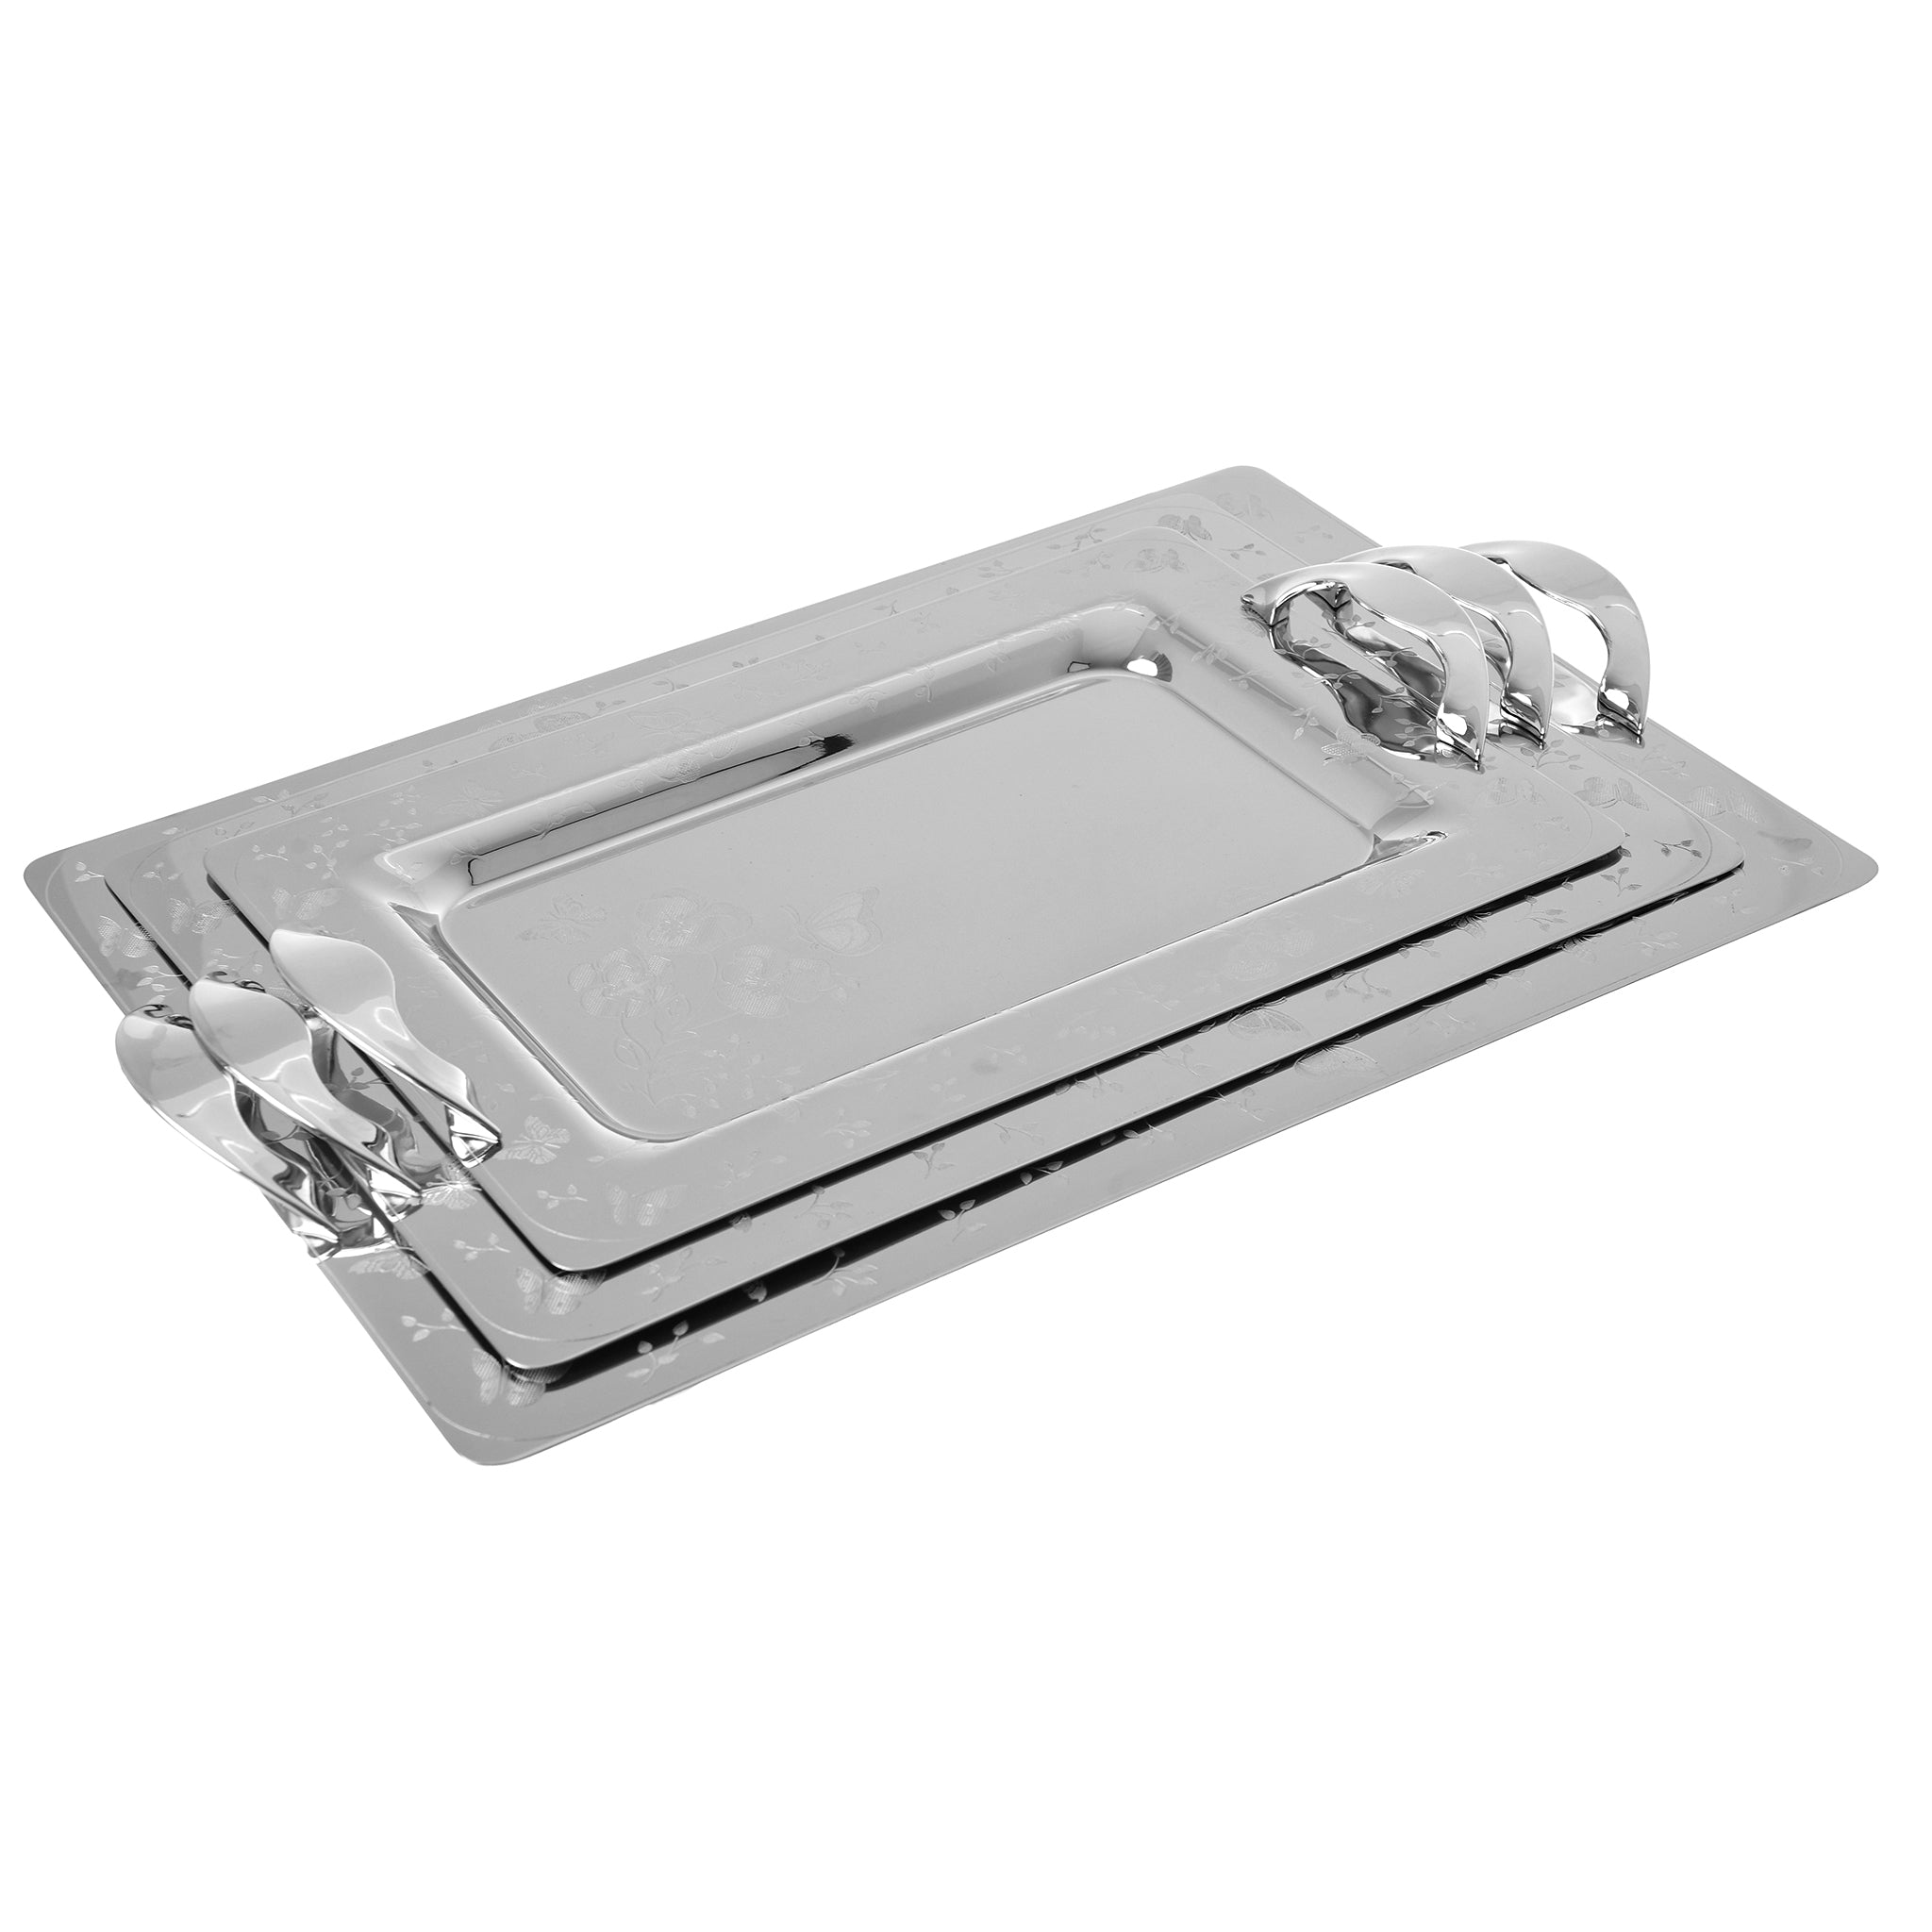 Elegant Gioiel - Rectangular Tray Set with Handles 3 Pieces - Stainless Steel 18/10 - 75000430